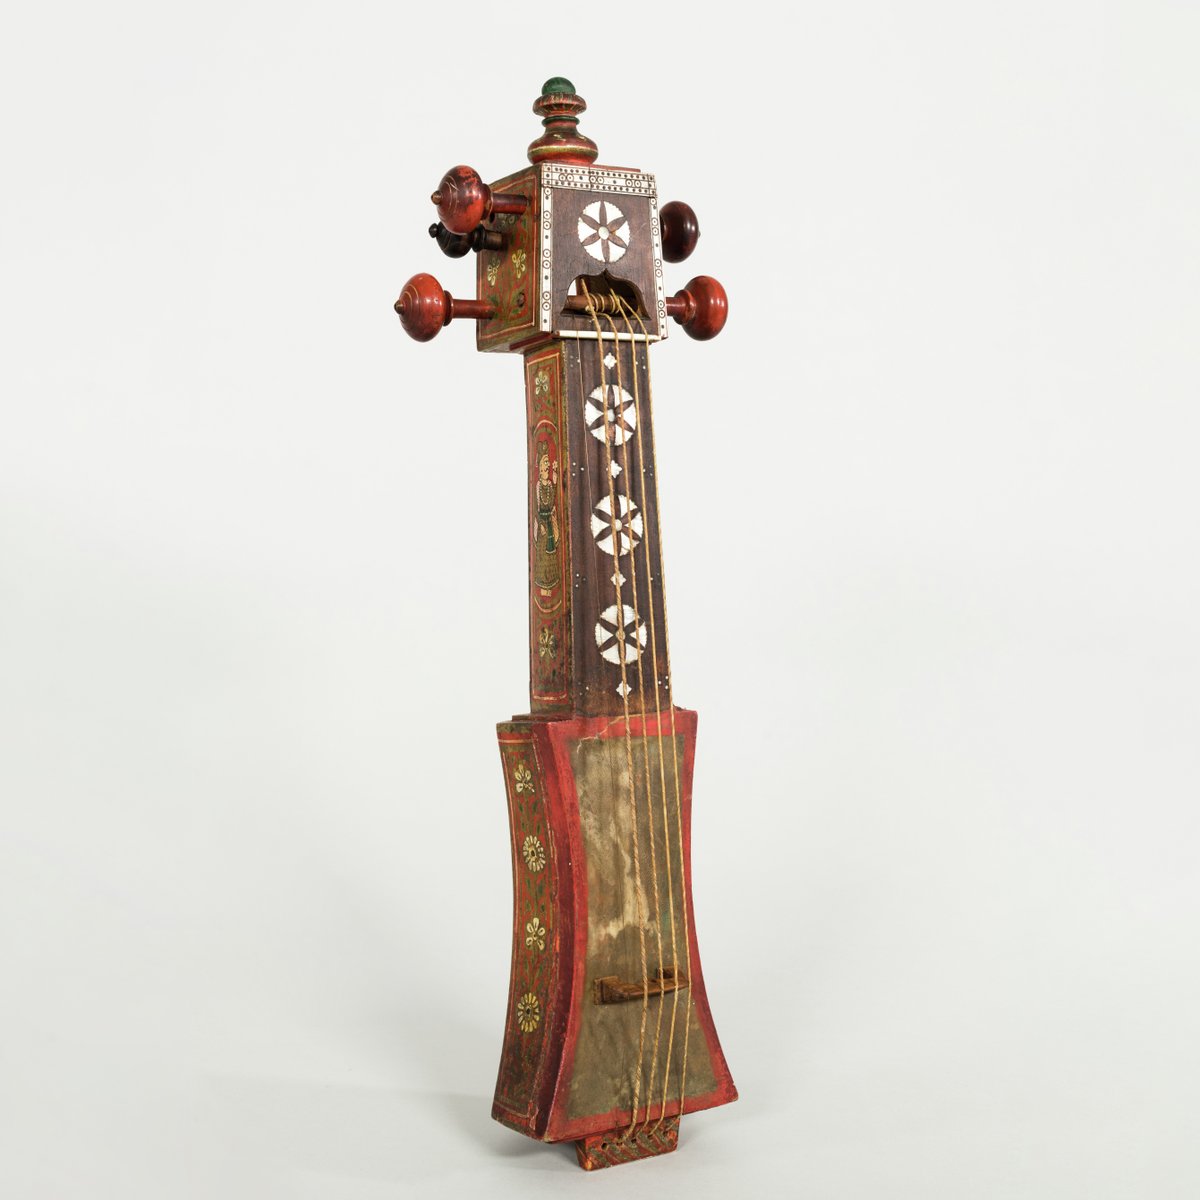 March’s Acquisition of the Month is this beautiful sāraṅgī, a bowed lute from India. Adorned with Asian ivory and mother-of-pearl inlays, this mid-19th century example is embellished with painted floral designs and miniatures. See this in our Orientation Gallery this month!